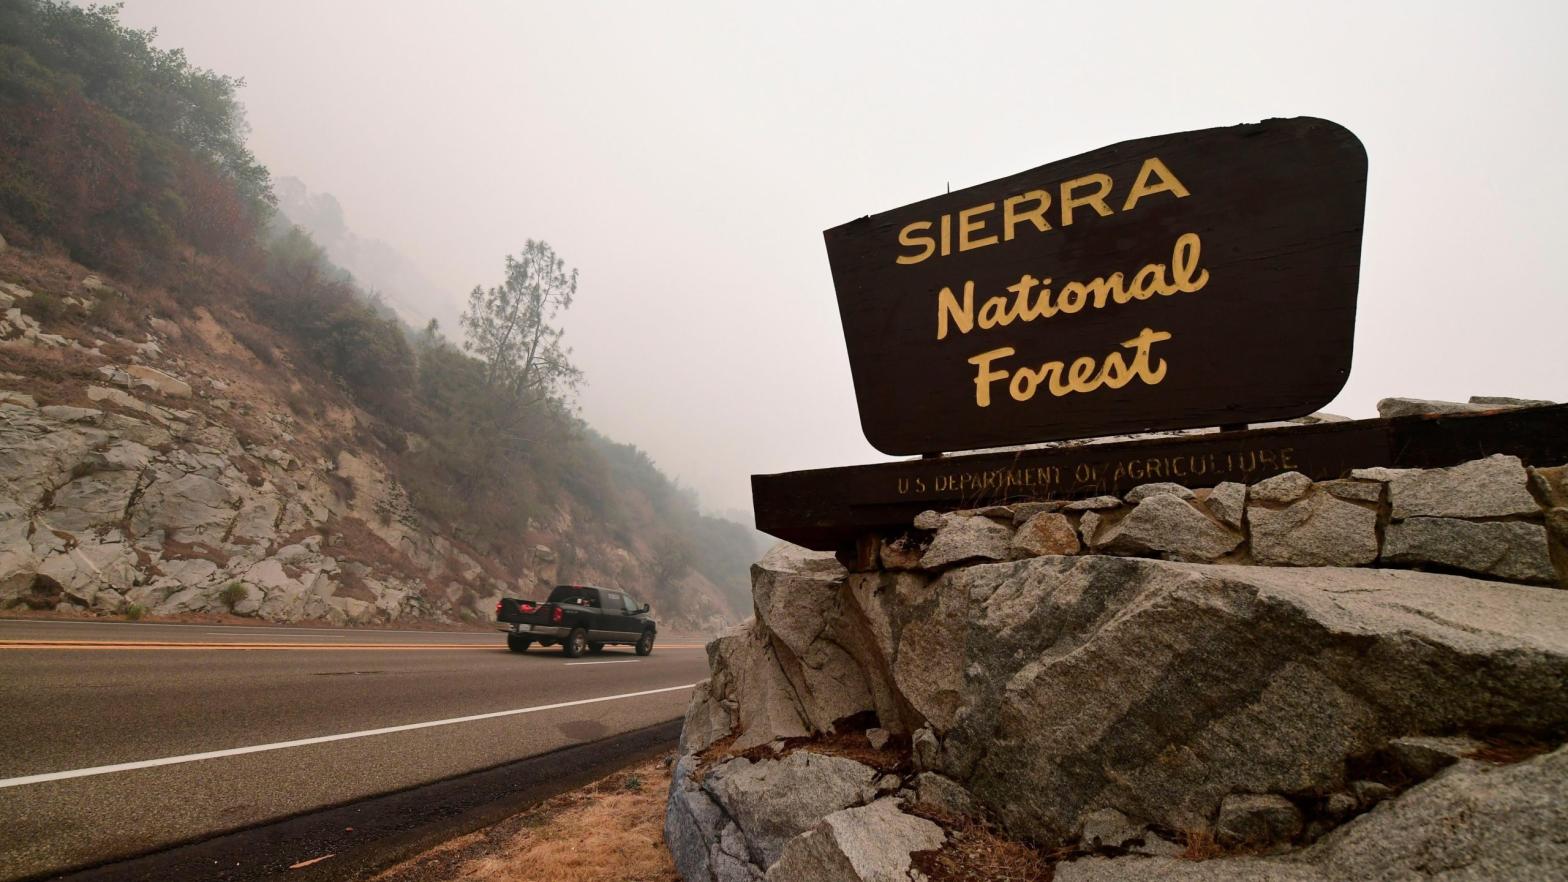 A vehicle entering the Sierra National Forest northeast of Fresno in the foothills of the Sierra Nevada mountains on Sept. 11, 2020, during a forest fire in the area. (Photo: Frederic J. Brown, Getty Images)